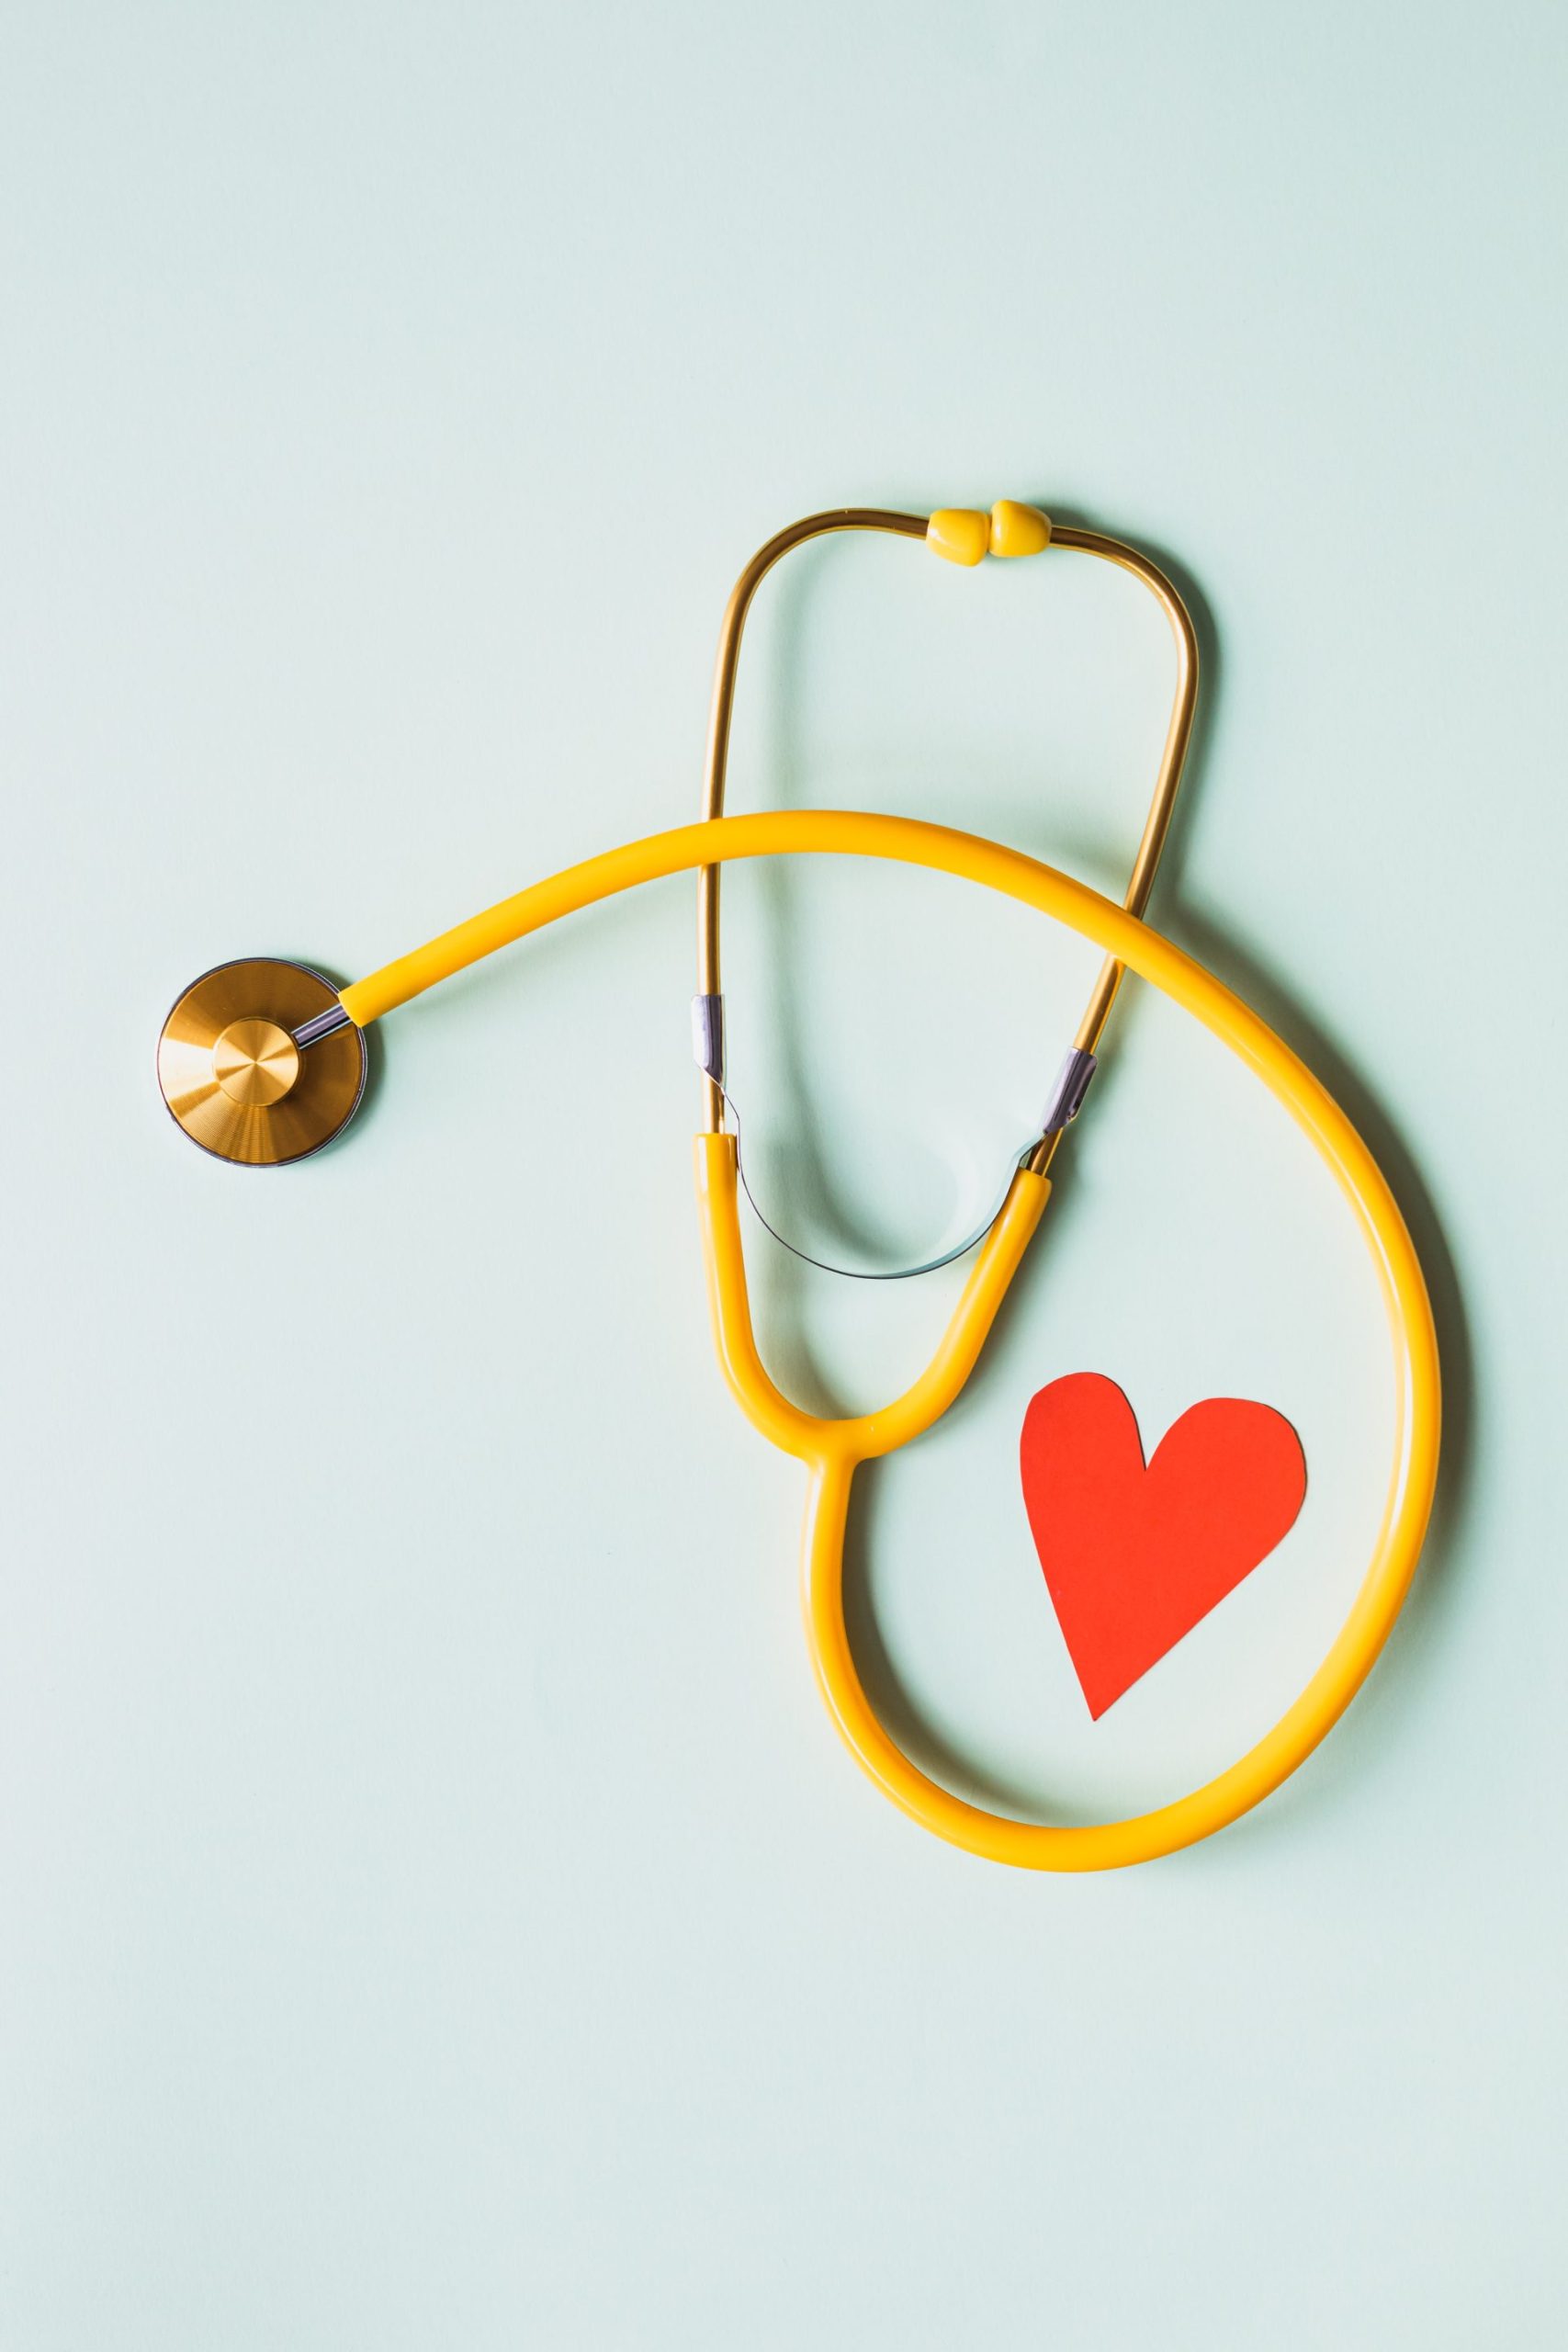 Stethoscope and a heart representing cholesterol panels